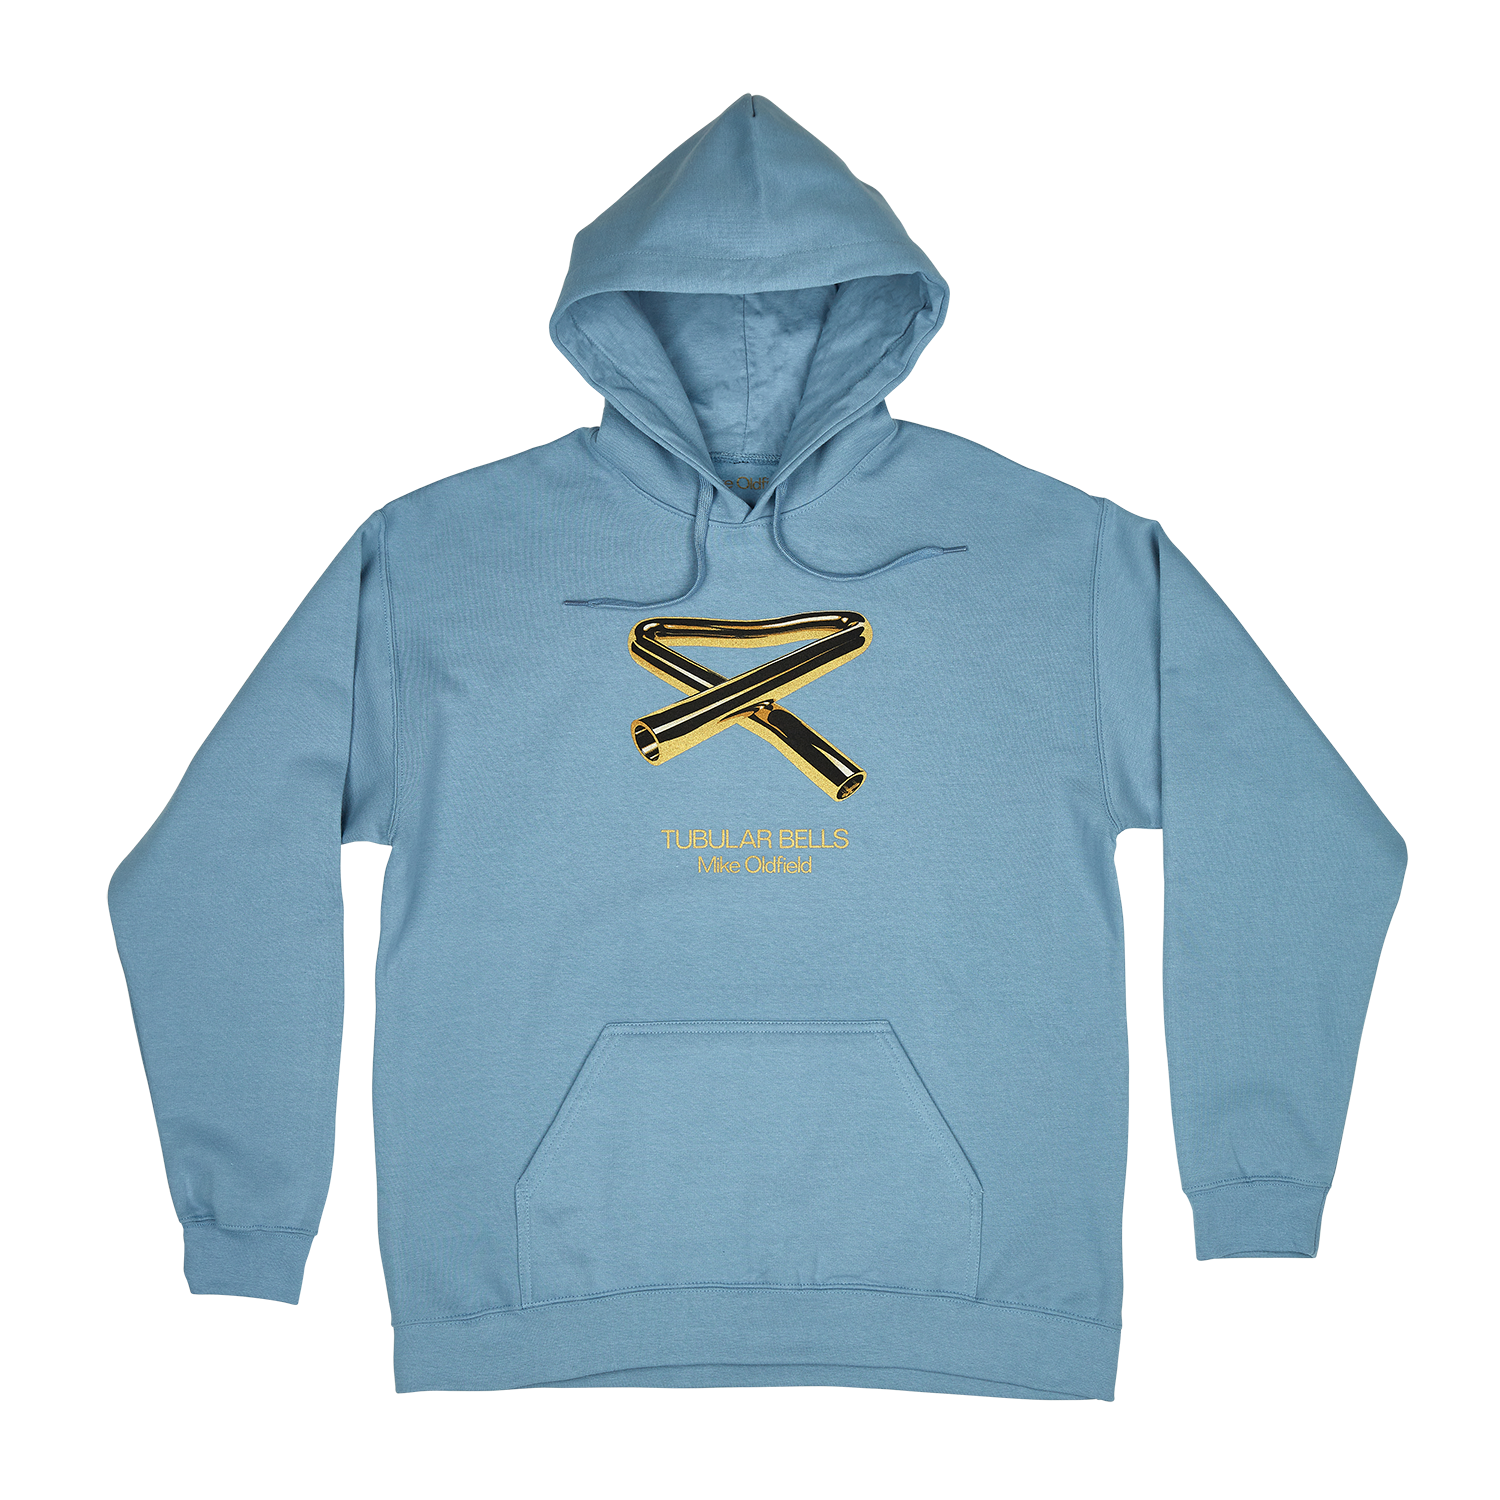 Official Tubular Bells Beanie + Official Tubular Bells Anniversary Hoodie (Stone Blue) + Official Tubular Bells Anniversary T-shirt (Olive)